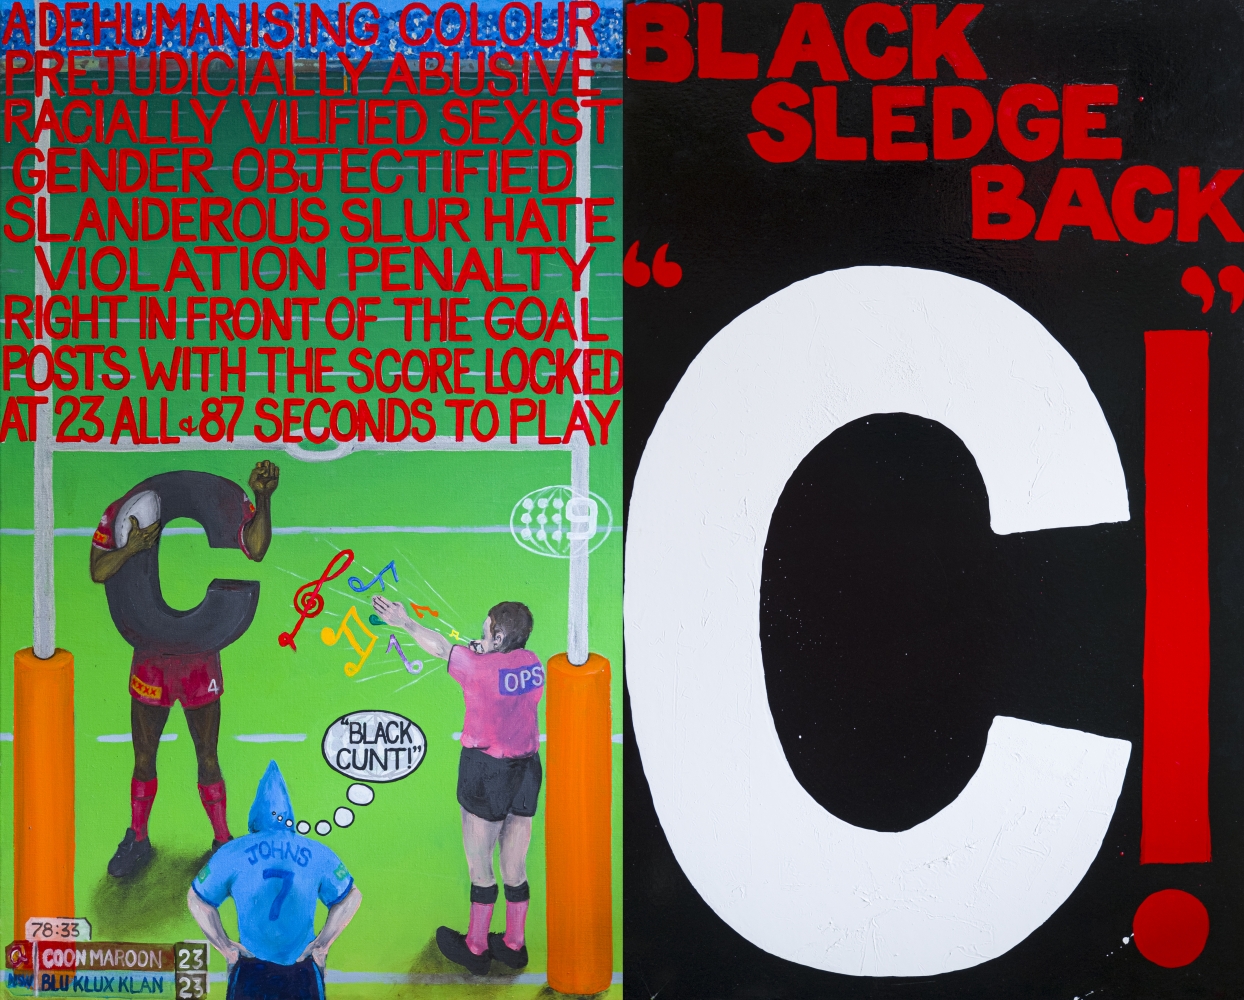 Black Cunt / Black Sledge Back, 2012
Oil on linen
47 1/4 x 30 inches (Painting 1)
47 1/4 x 30 inches (Painting 2)